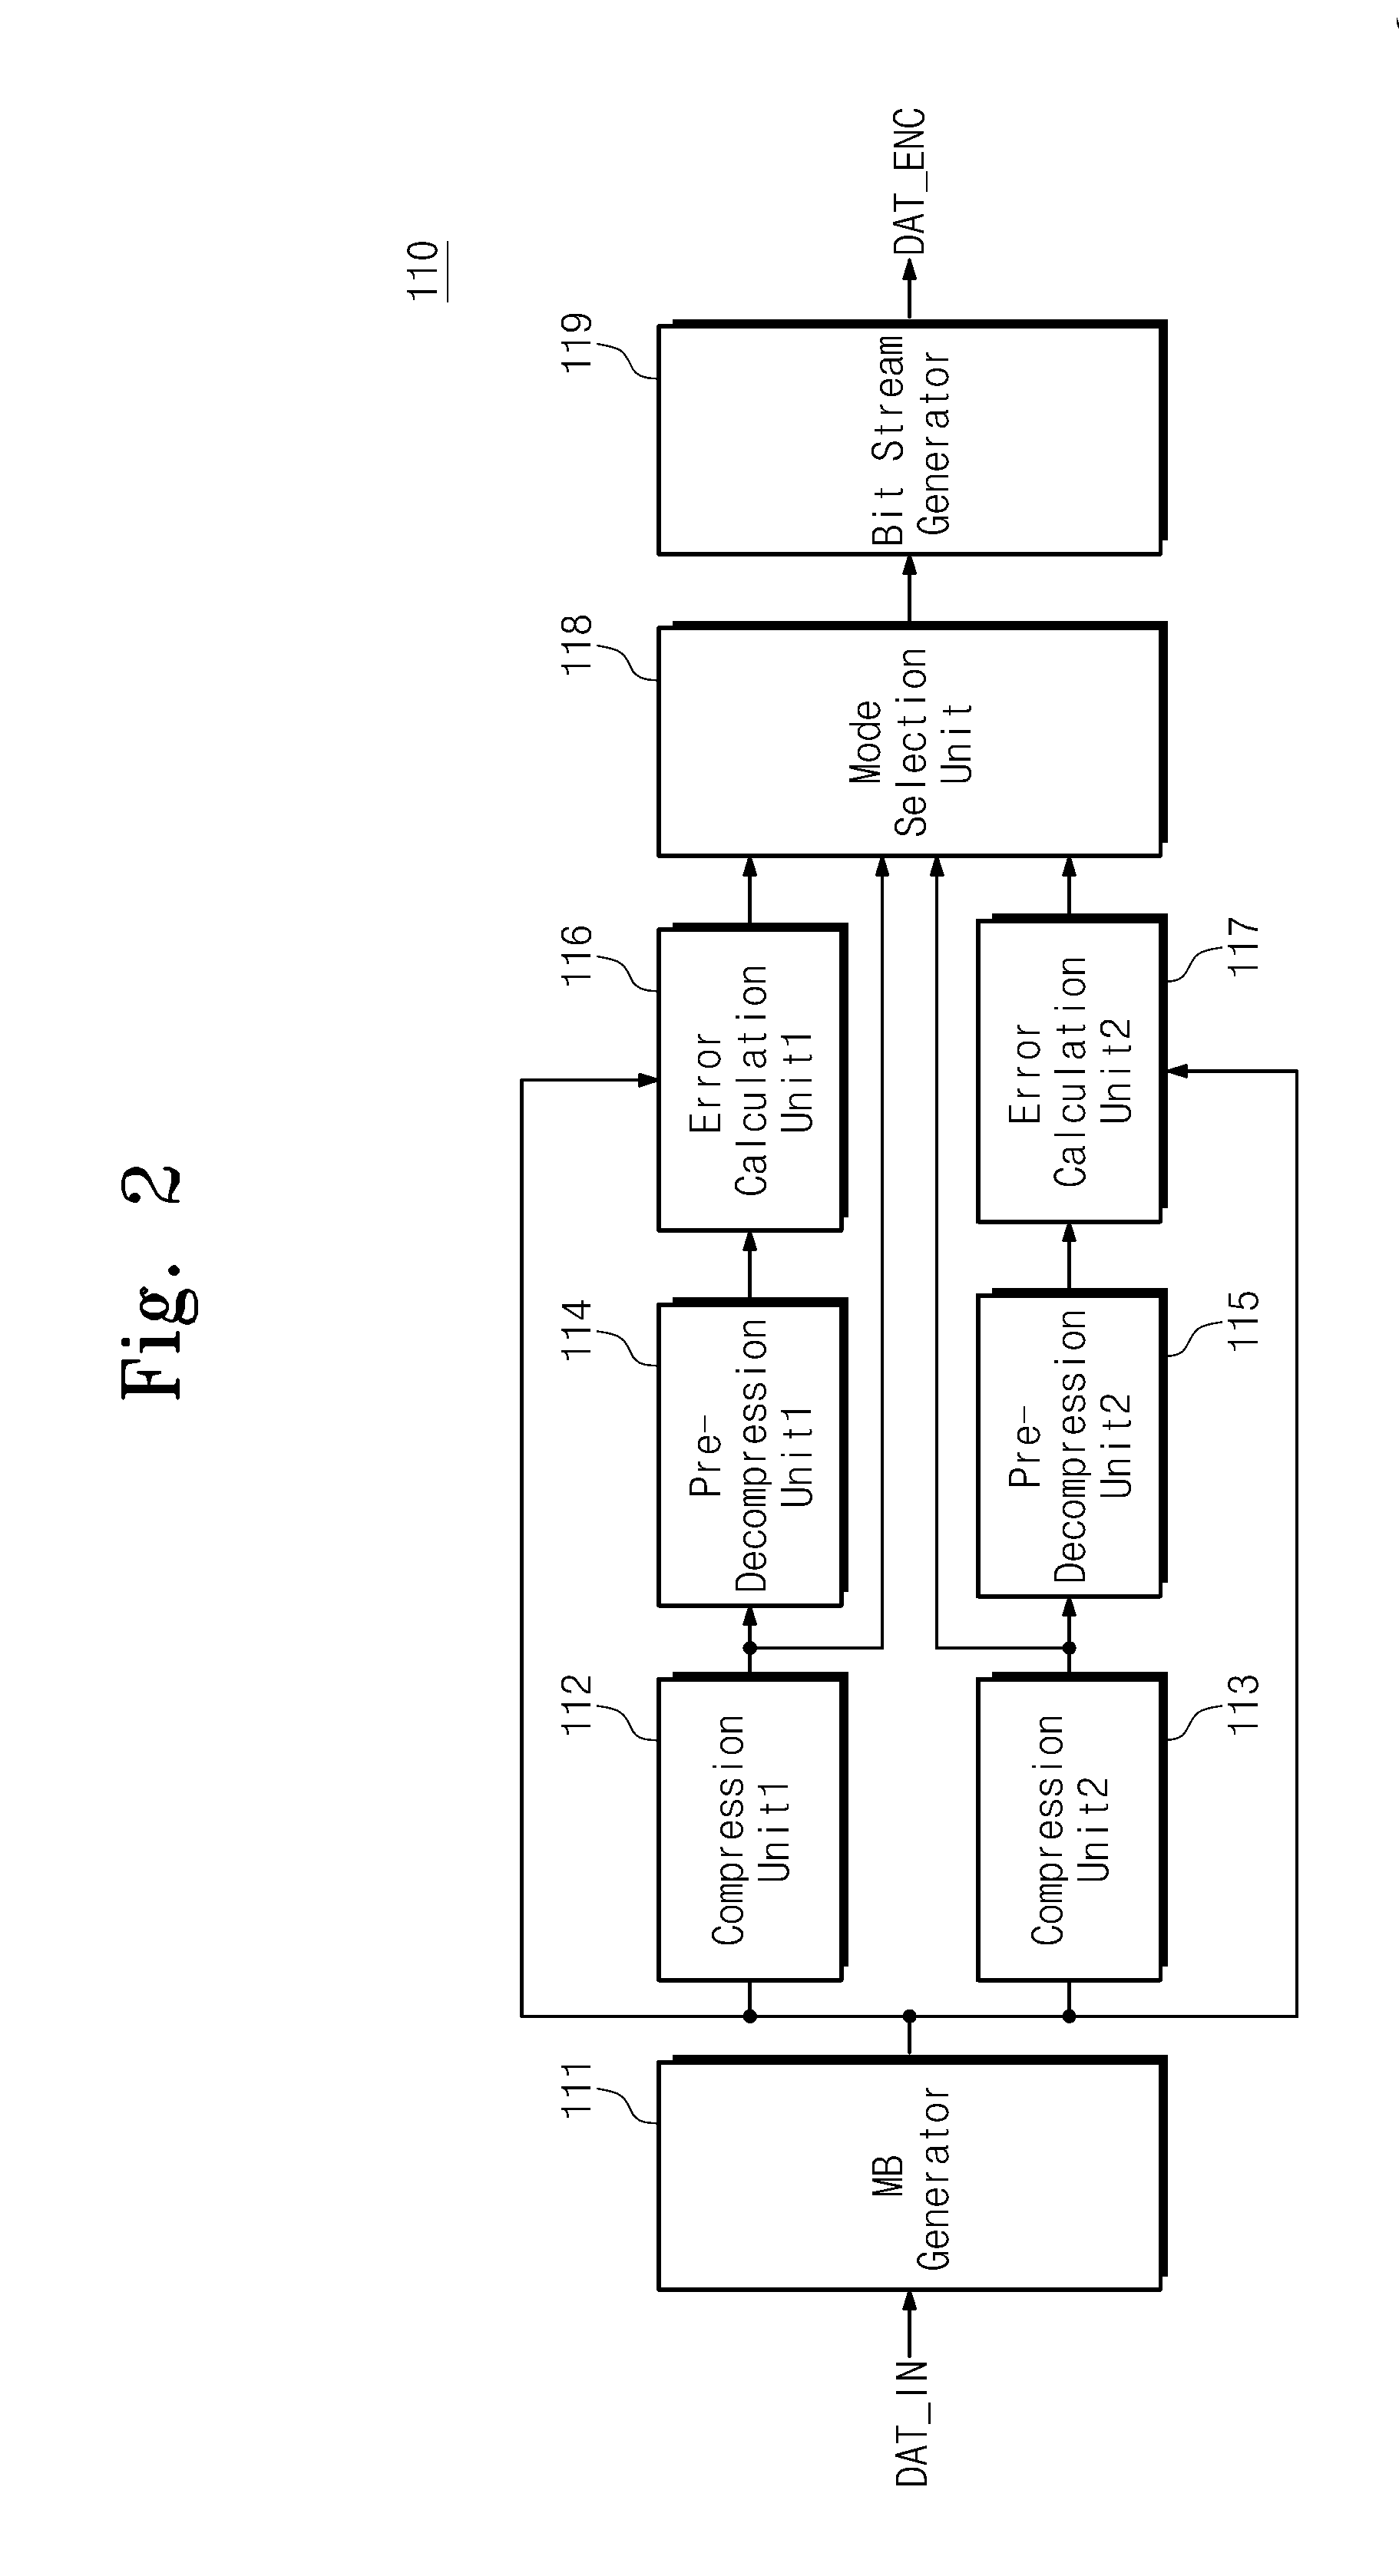 Image data compressing and decompressing methods and display driving device using the same